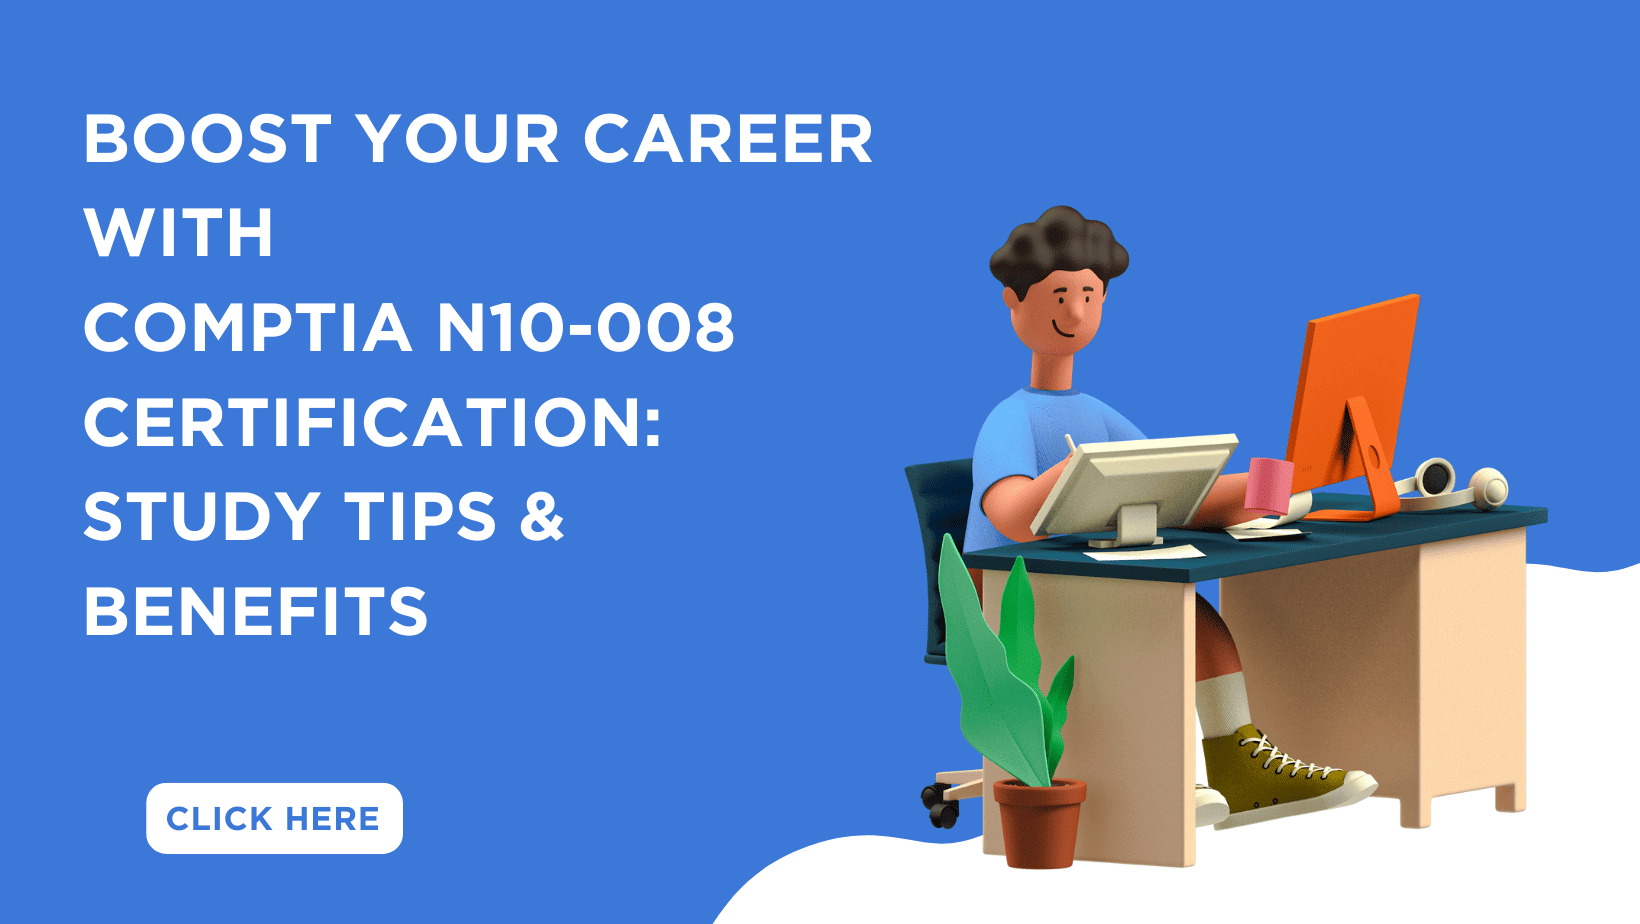 Master the N10-008 CompTIA Network+ exam with expert study tips and practice tests. Boost your IT career with the N10-008 certification.